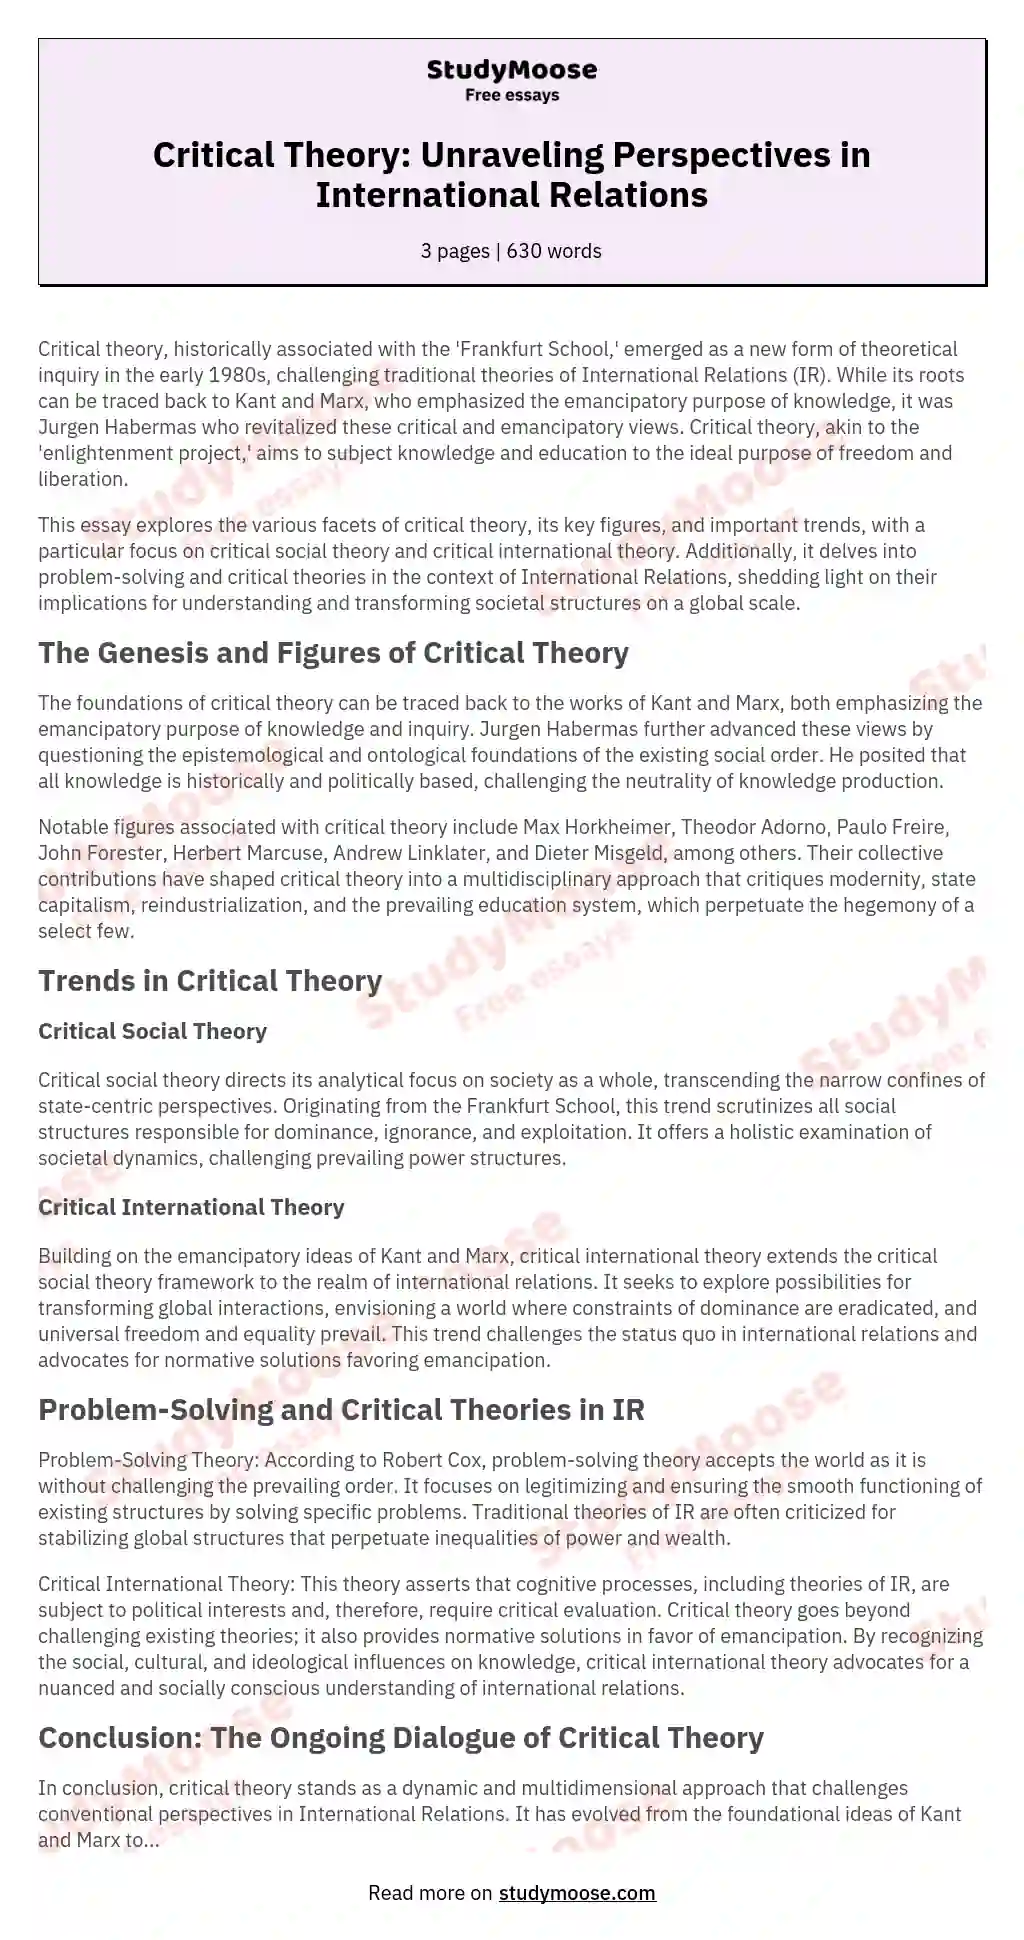 Critical Theory: Unraveling Perspectives in International Relations essay